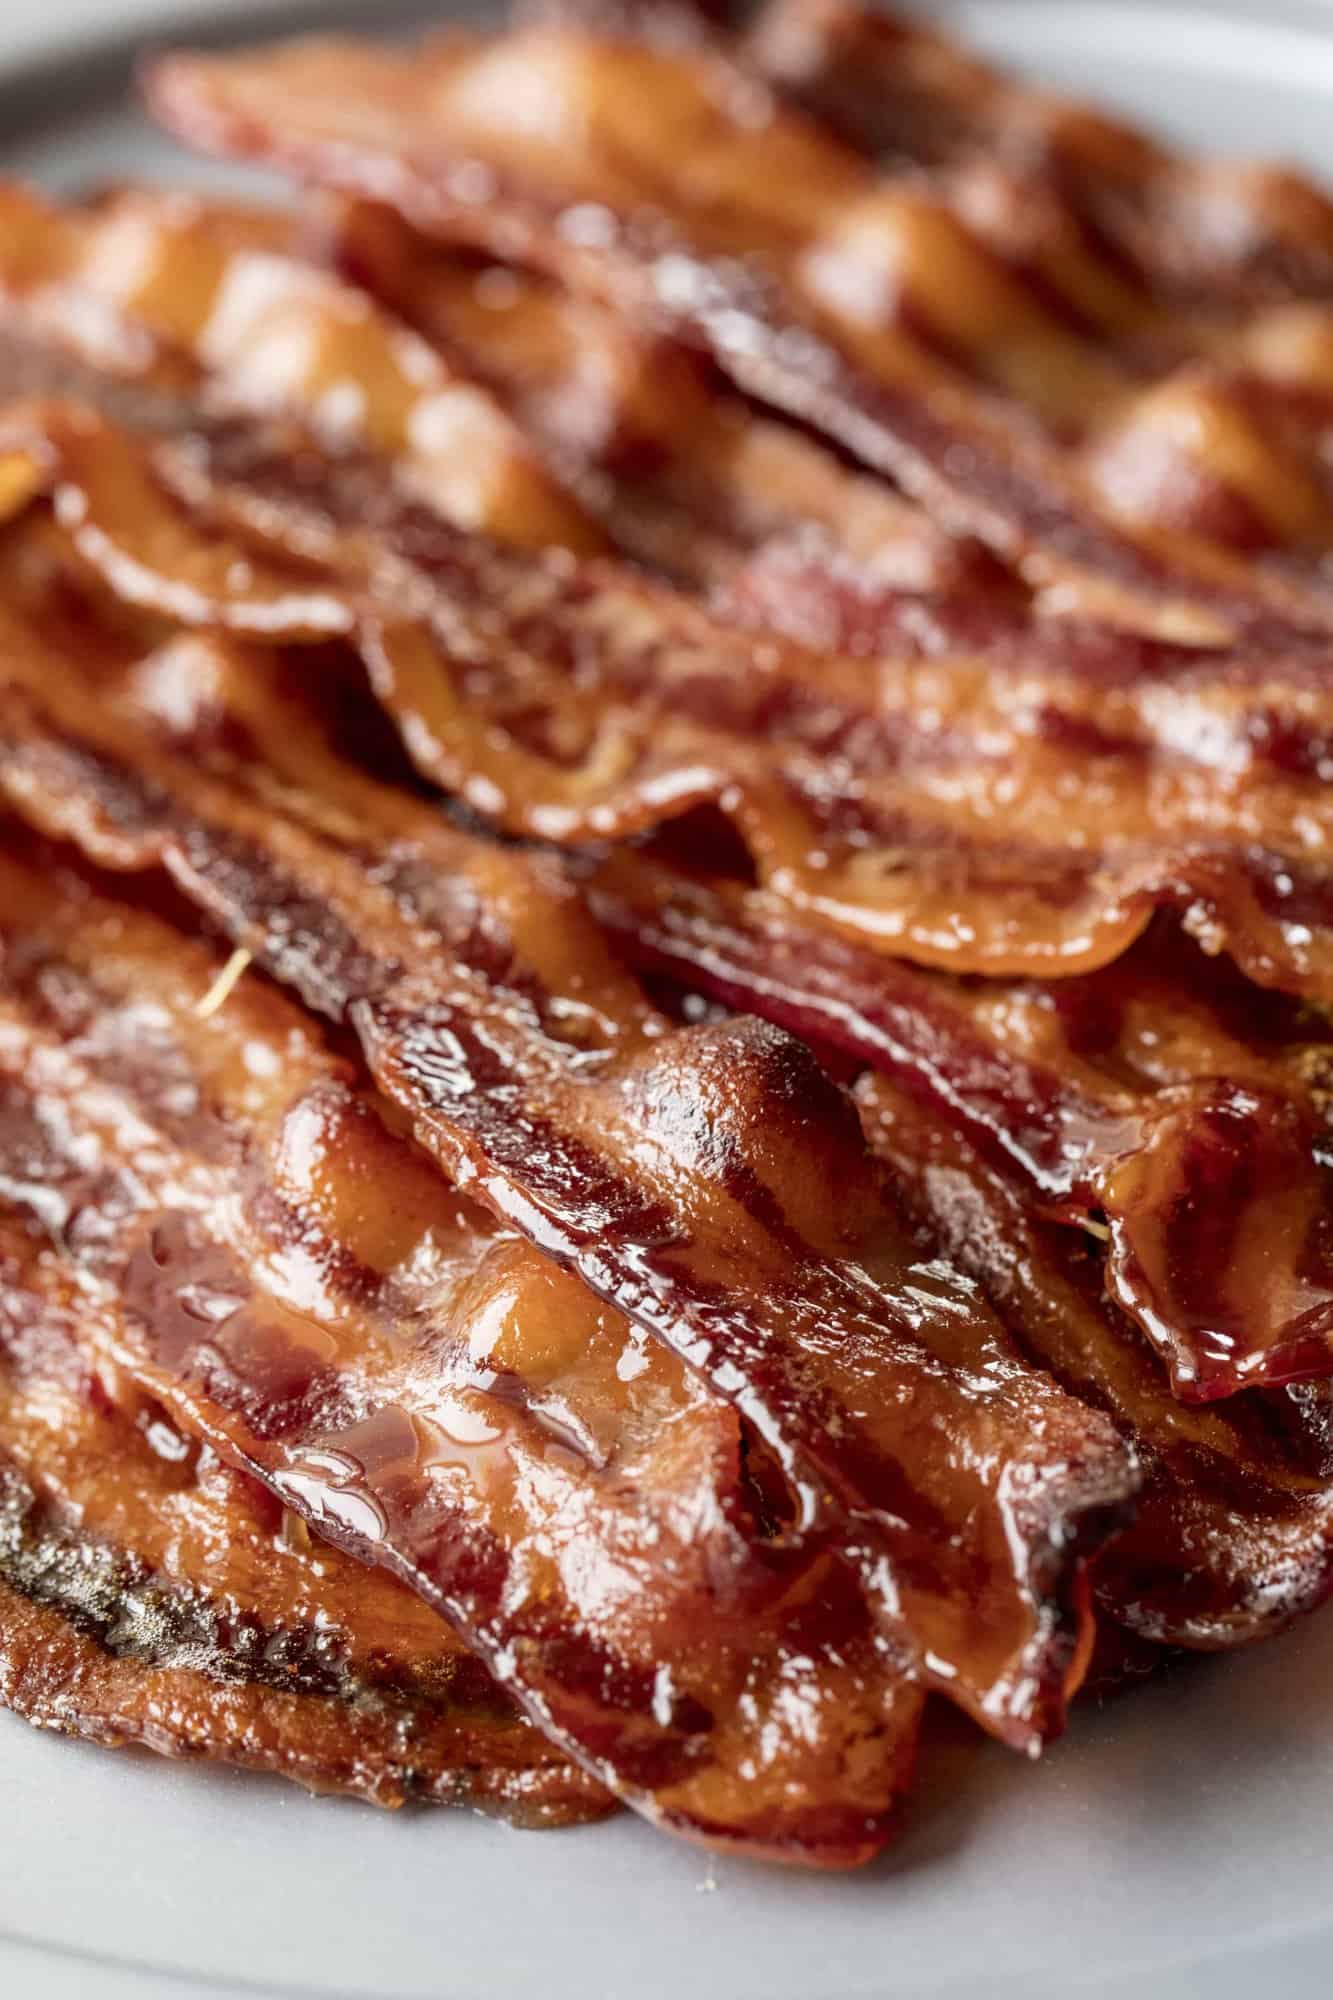  Close up of a stack of Candied Bacon to show maple syrup, brown sugar, cayenne pepper sauce on them.